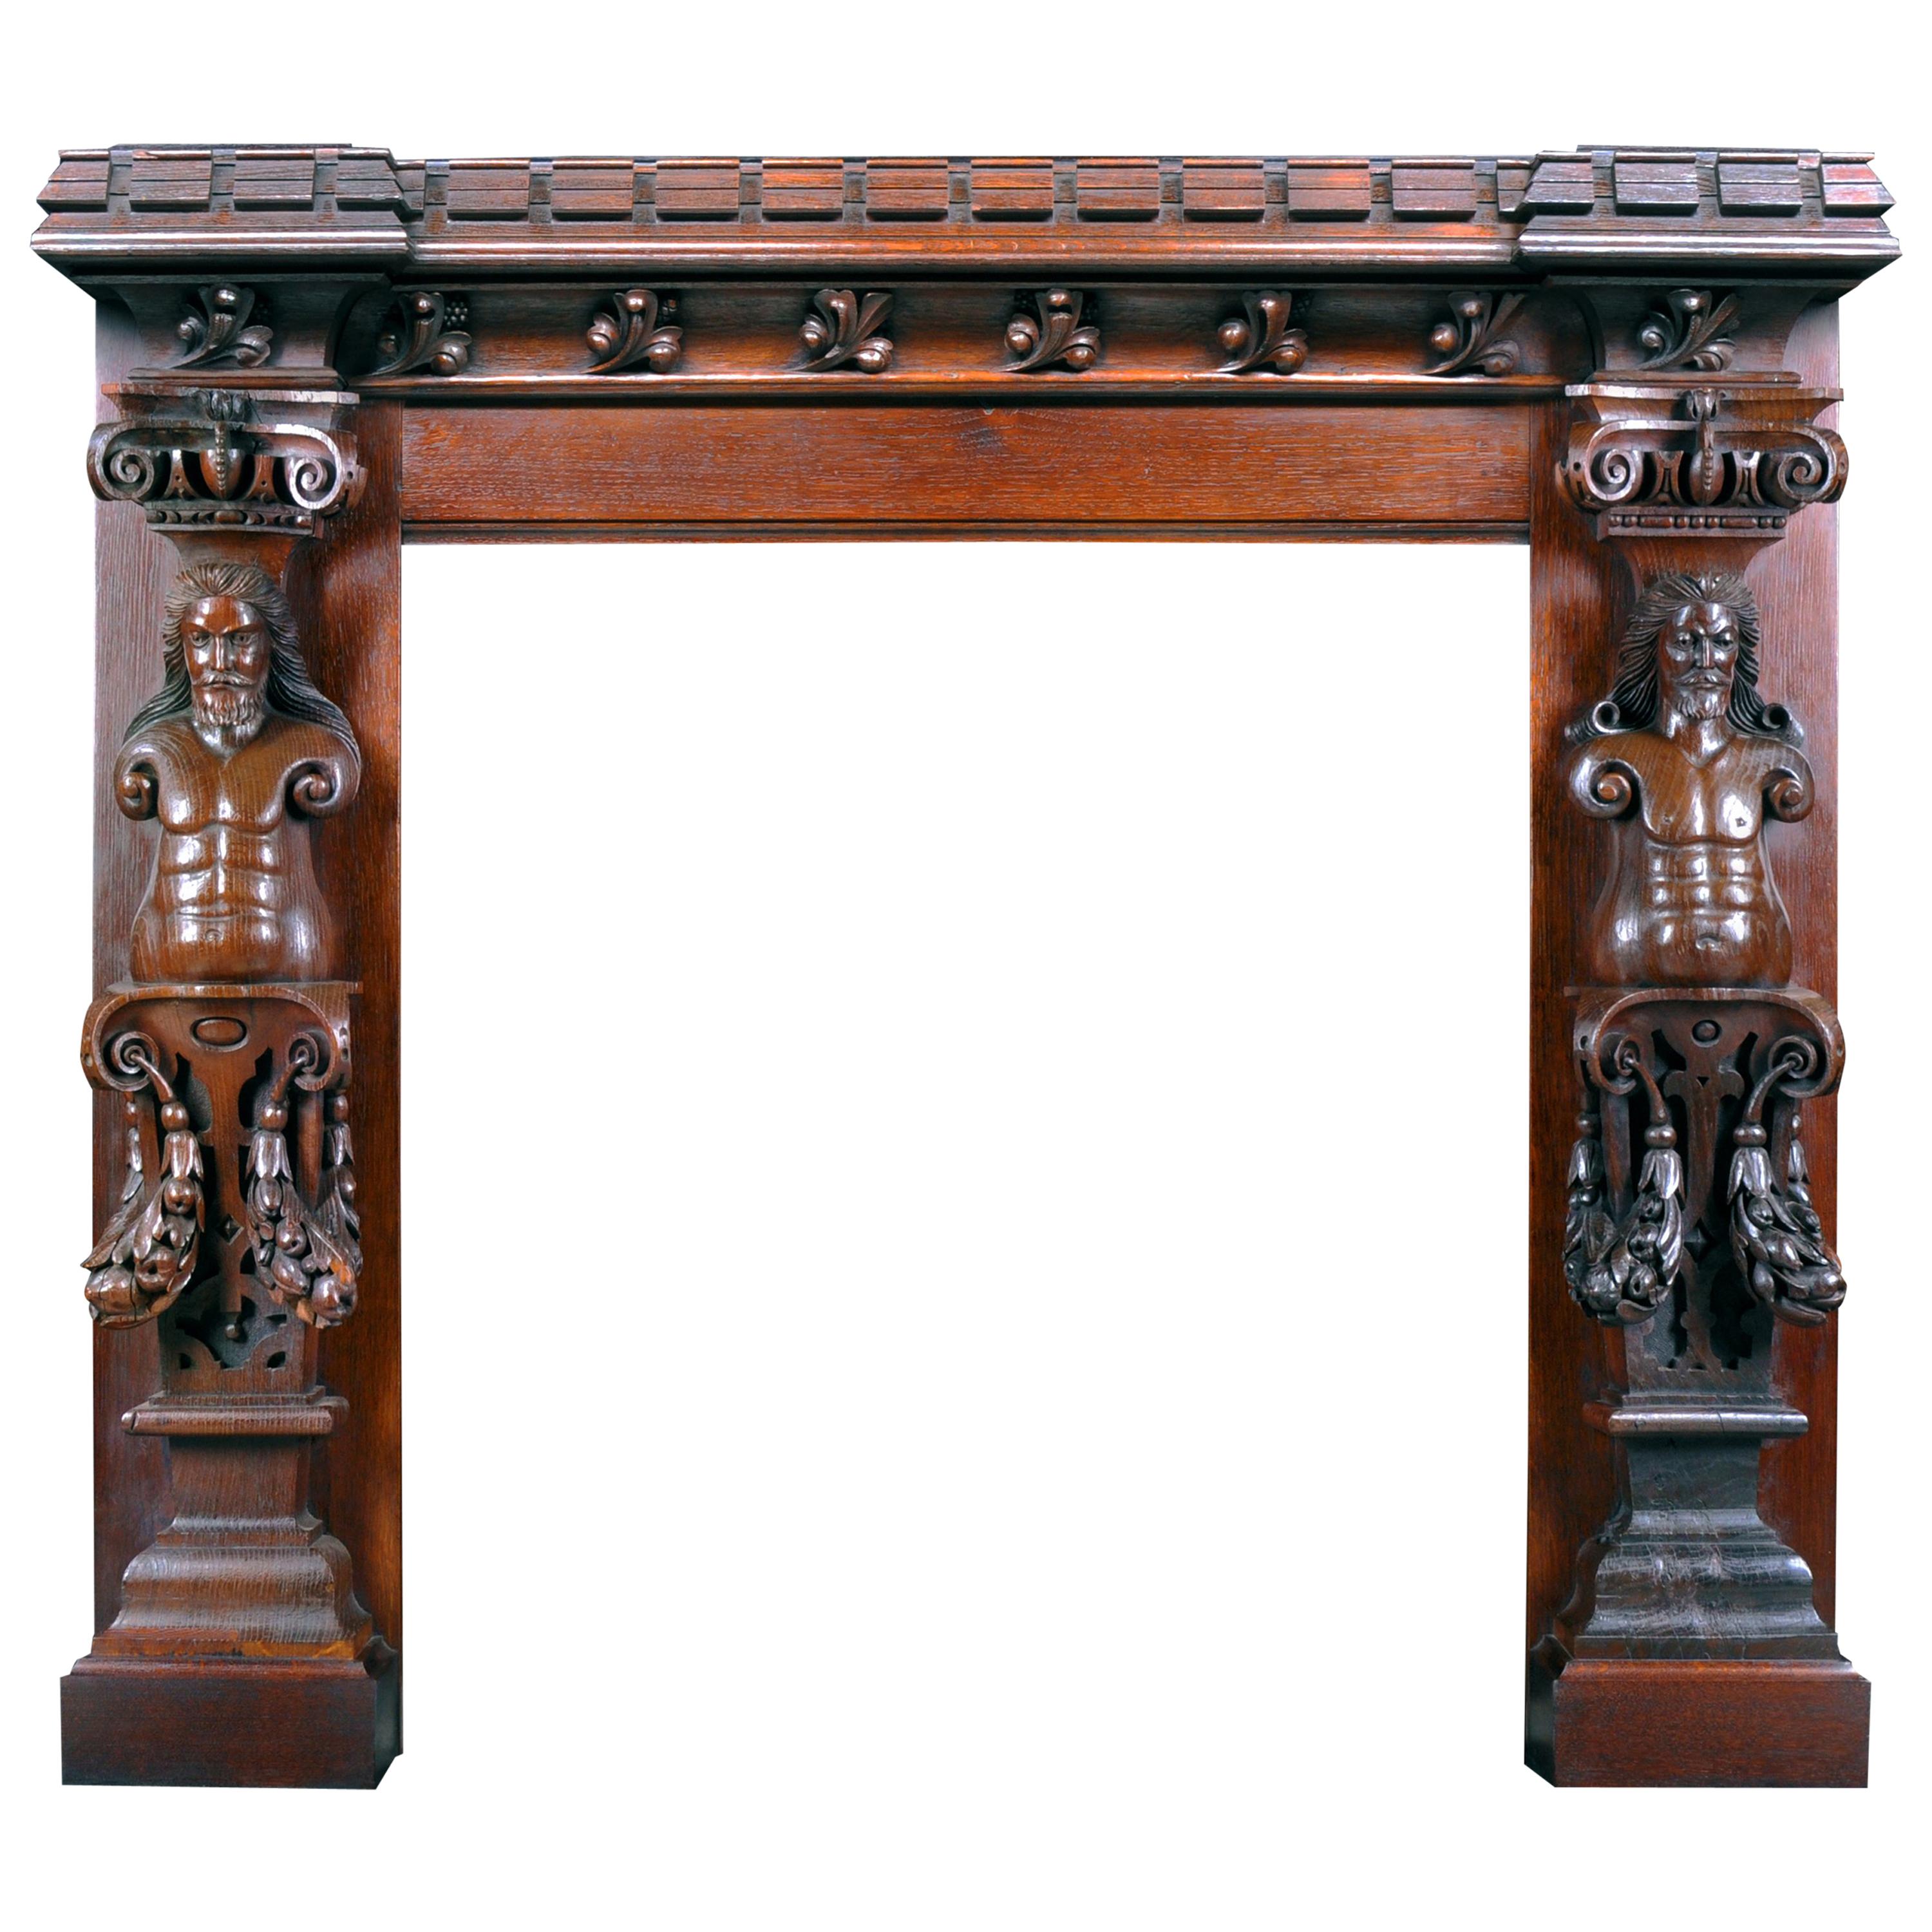 Castellated Jacobean Revival Style Antique Carved Oak Fireplace Mantel